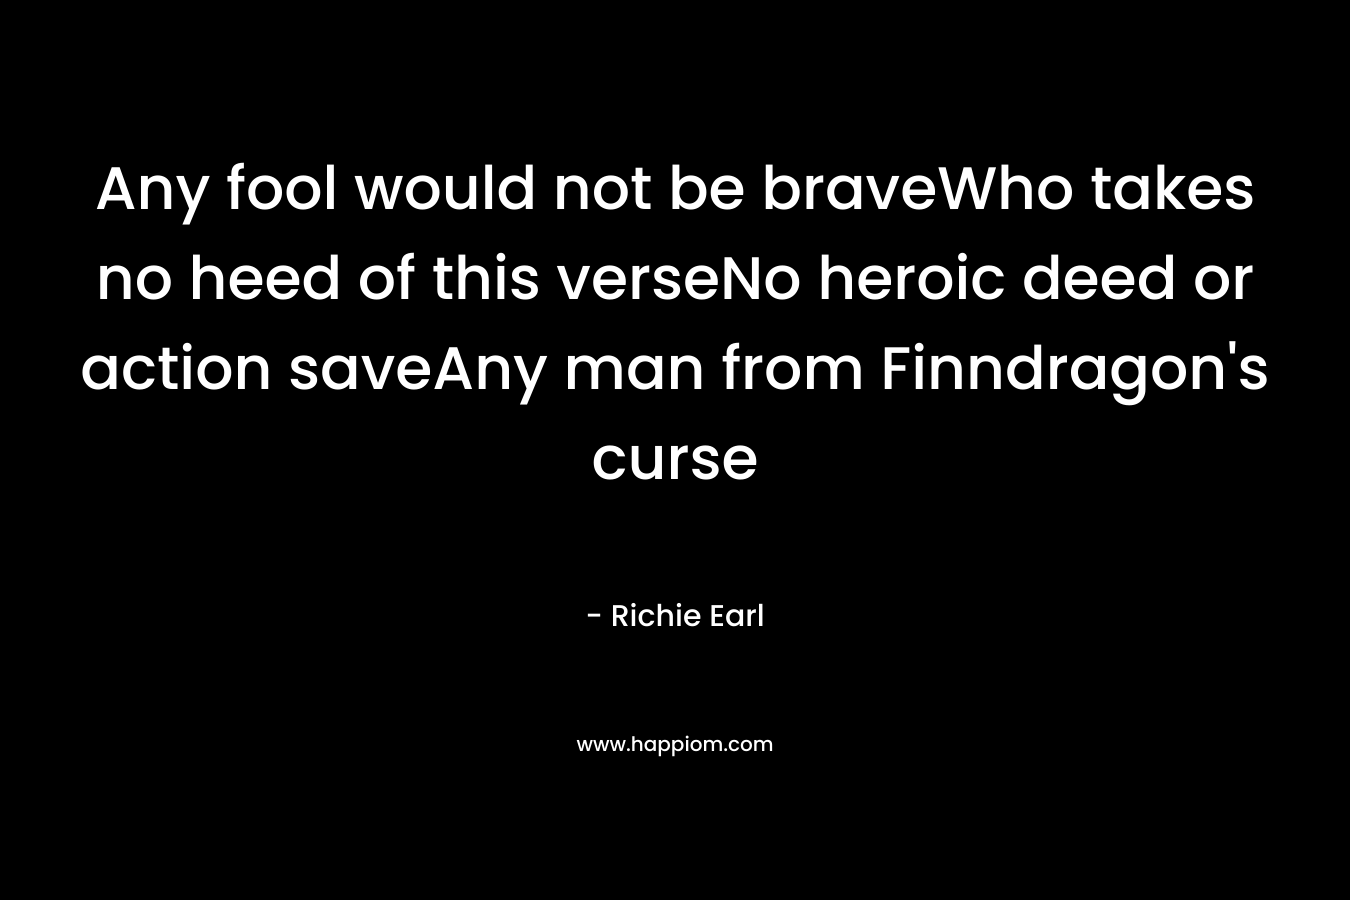 Any fool would not be braveWho takes no heed of this verseNo heroic deed or action saveAny man from Finndragon’s curse – Richie Earl